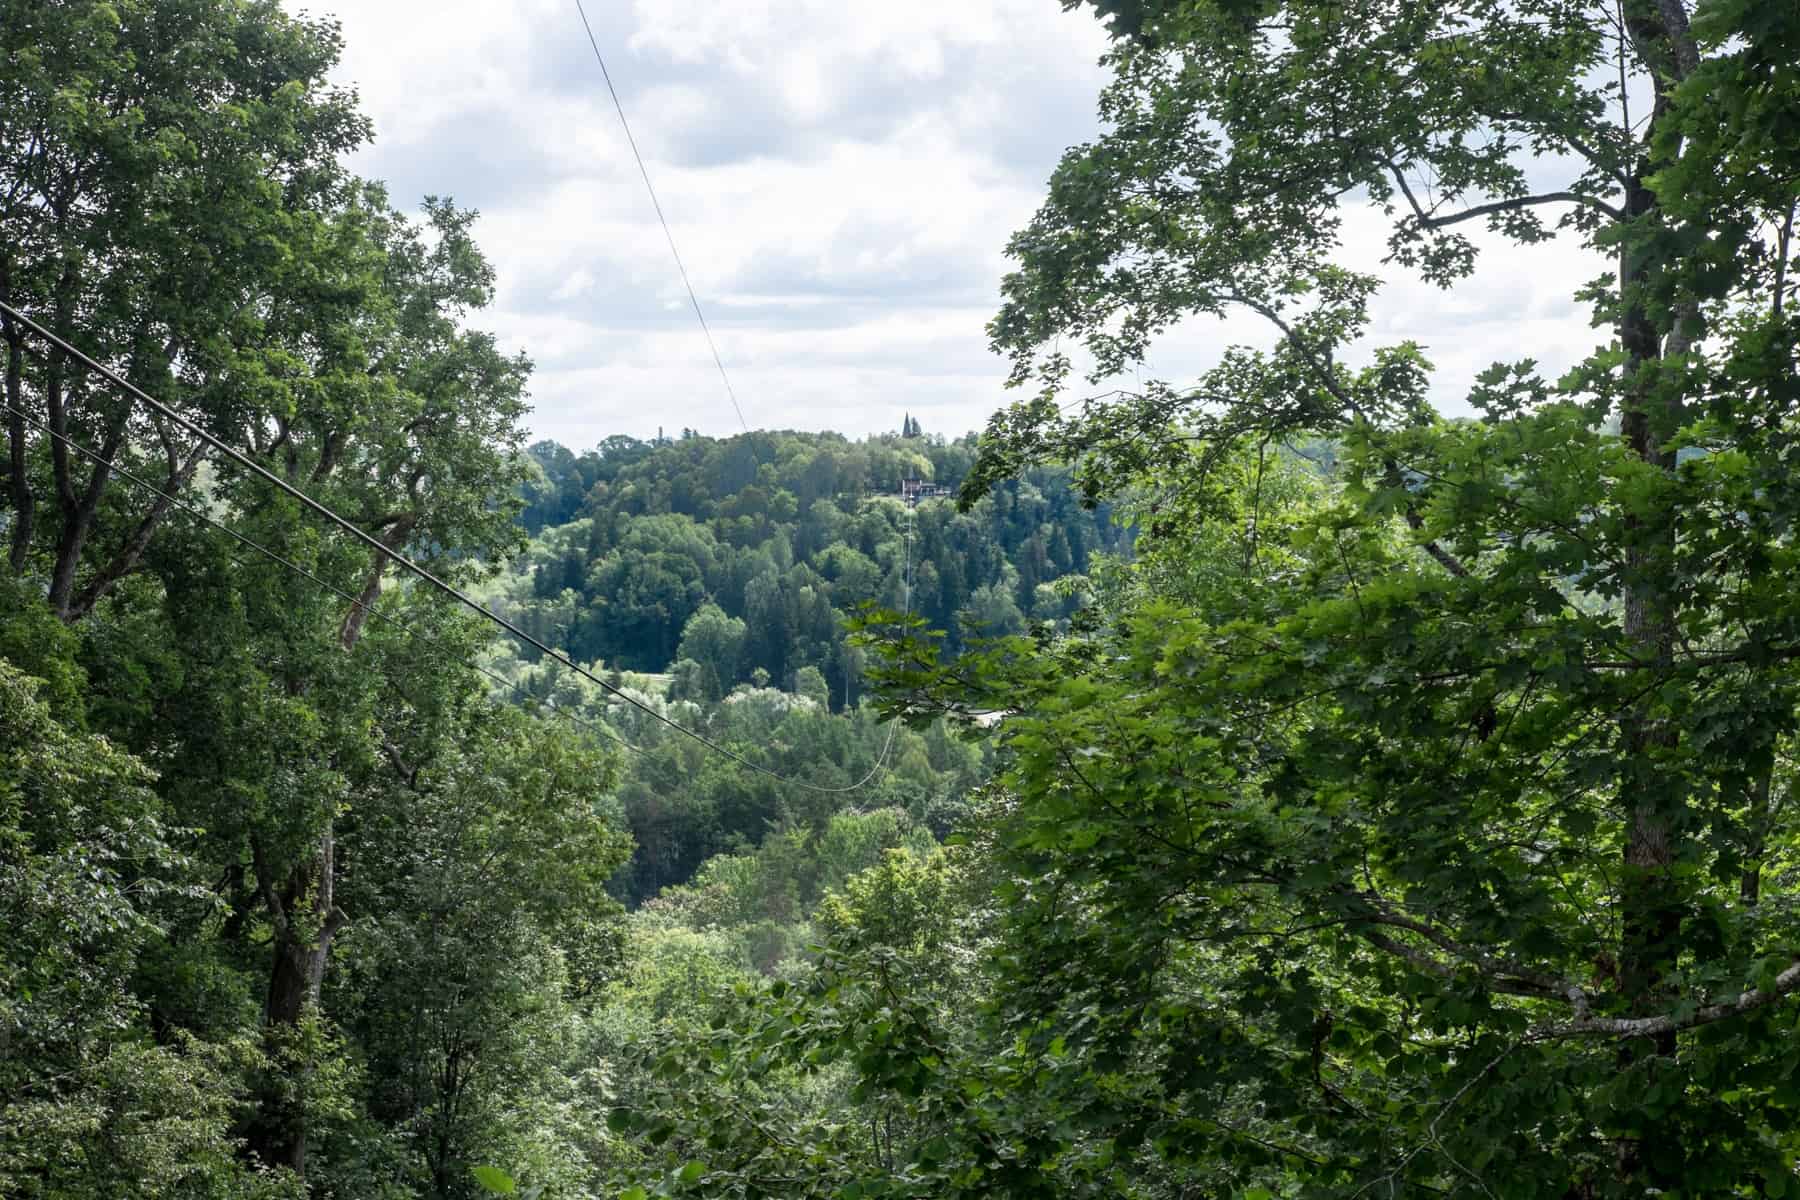 A cable car wire cuts through a large swath of green forest and between wide trees in Sigulda, Latvia.